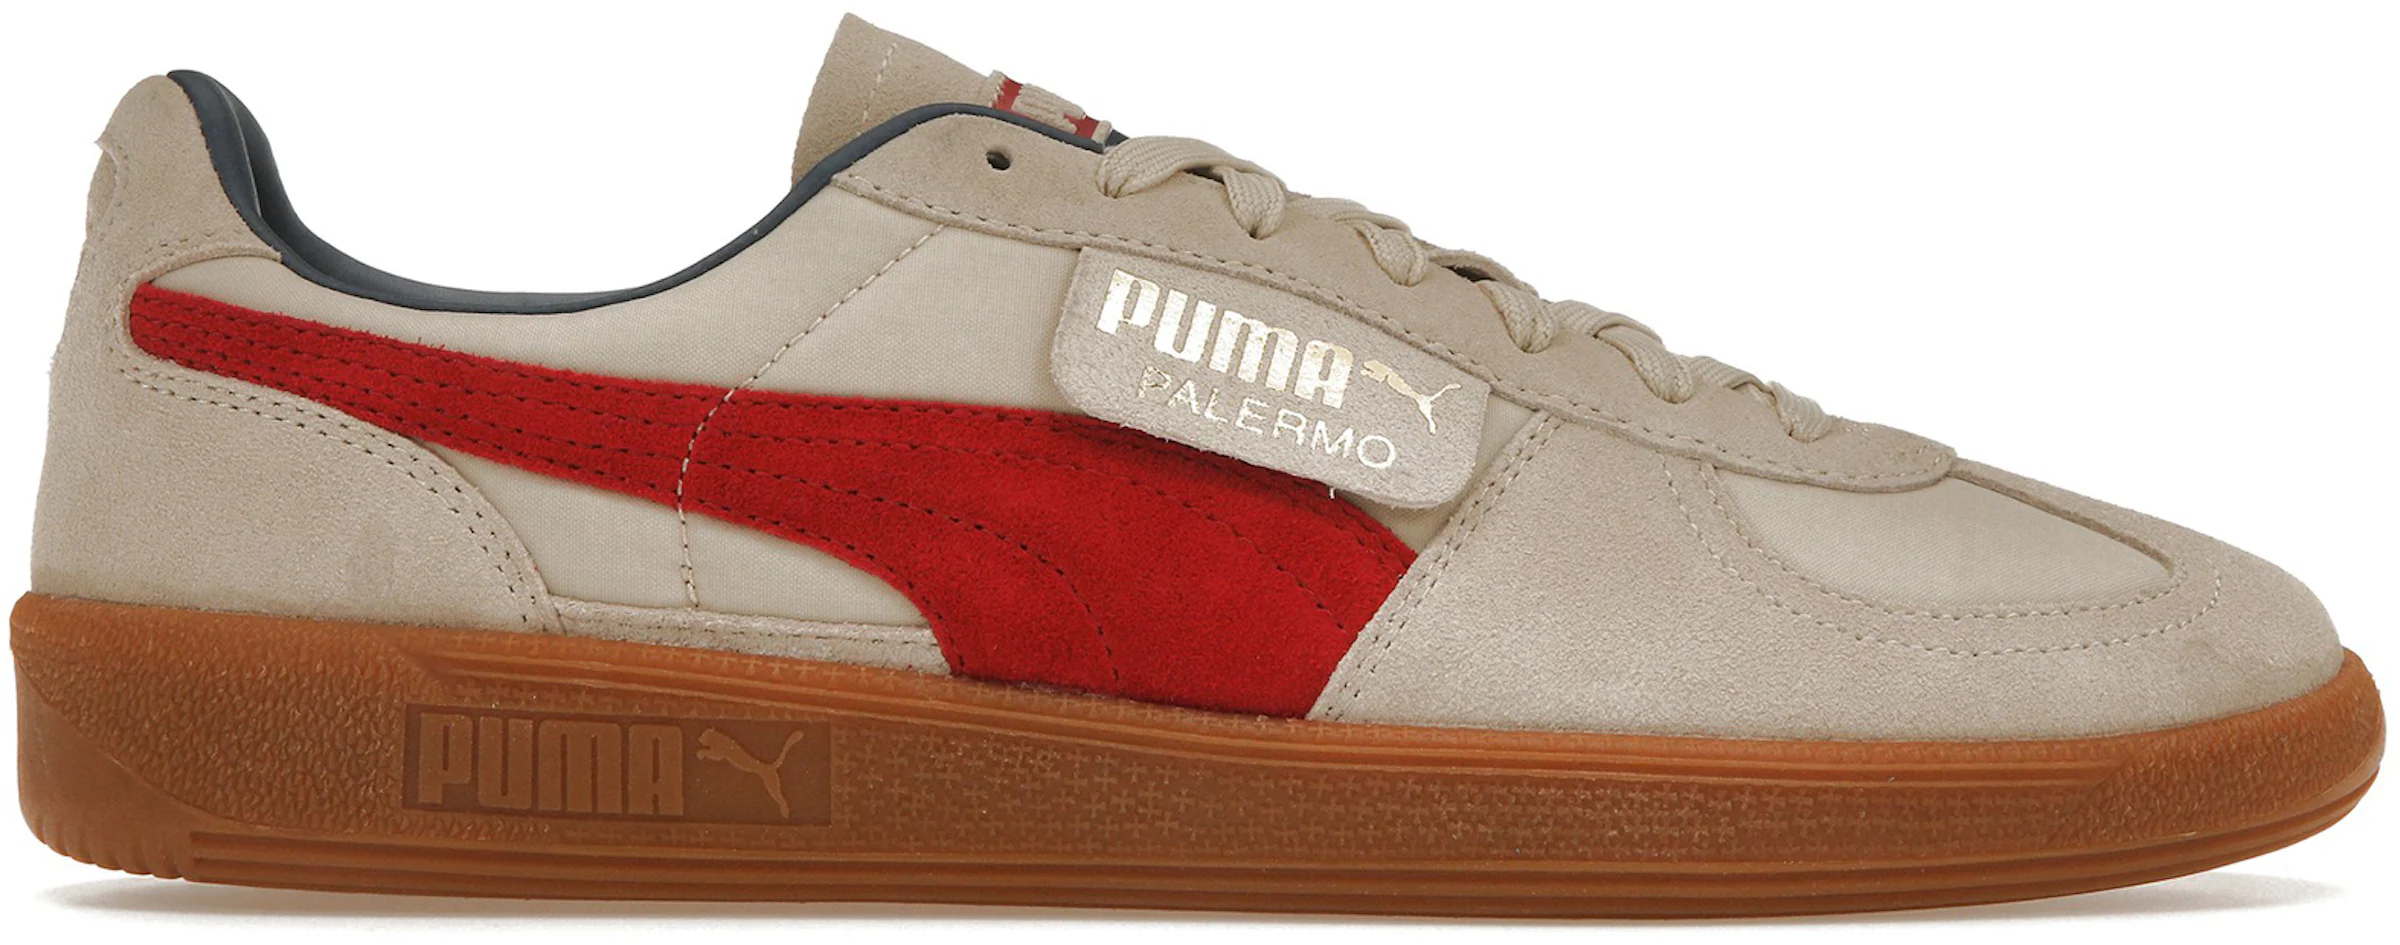 Puma Palermo size? The Godfather The Bar Men's - 385243-01 - US